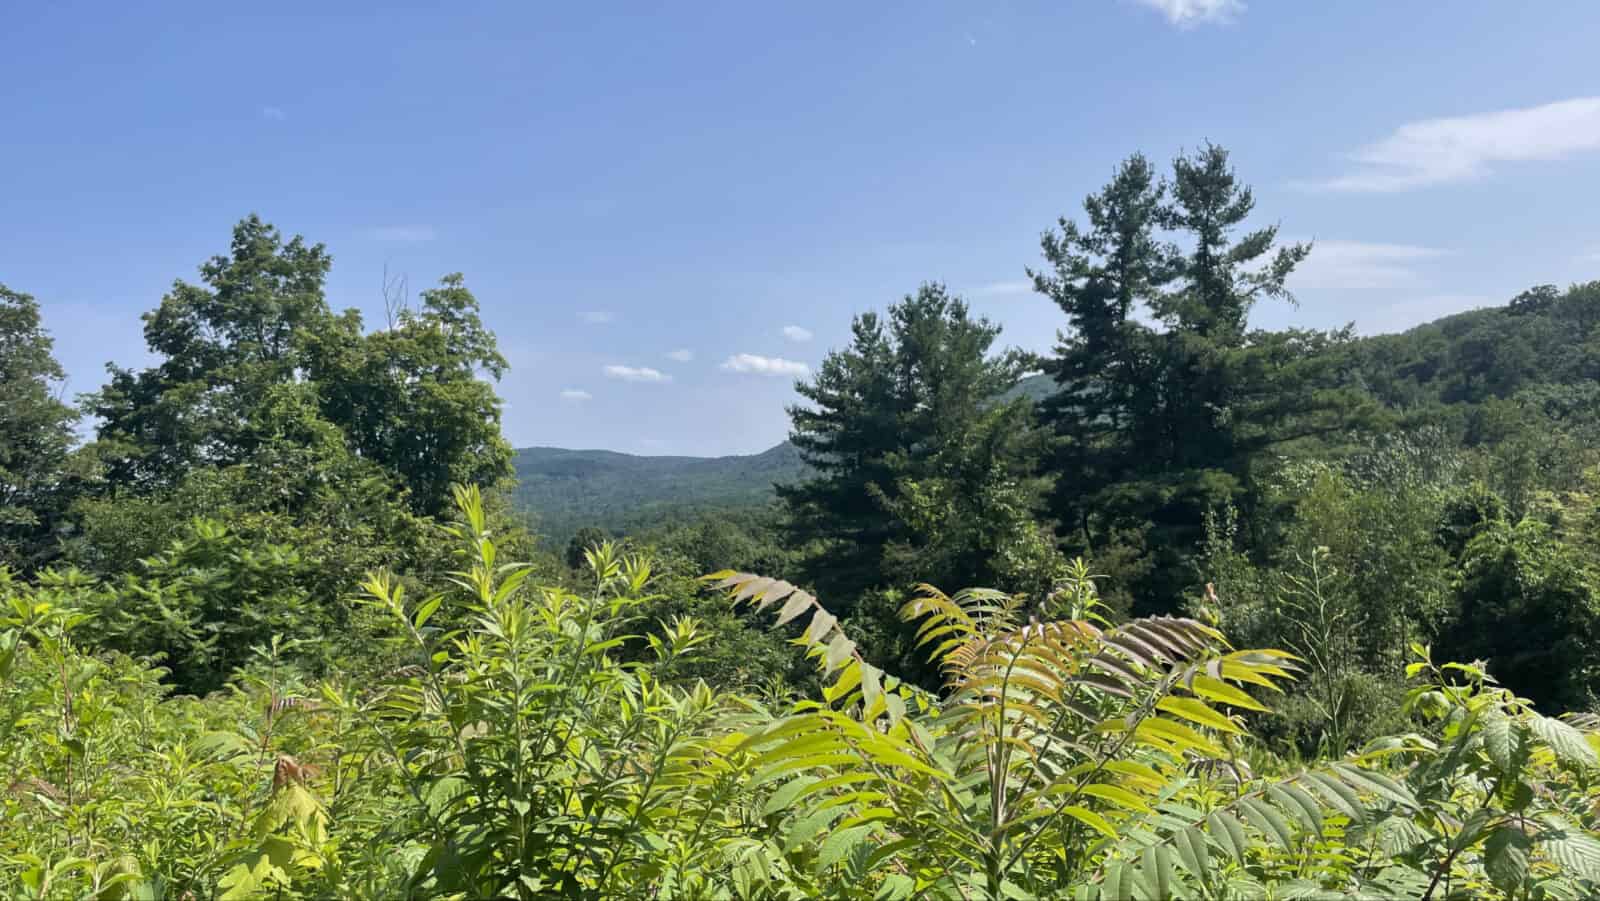 A high meadow gives a wide view over young sumac trees on Tyringham Cobble and the Appalachian Trail.